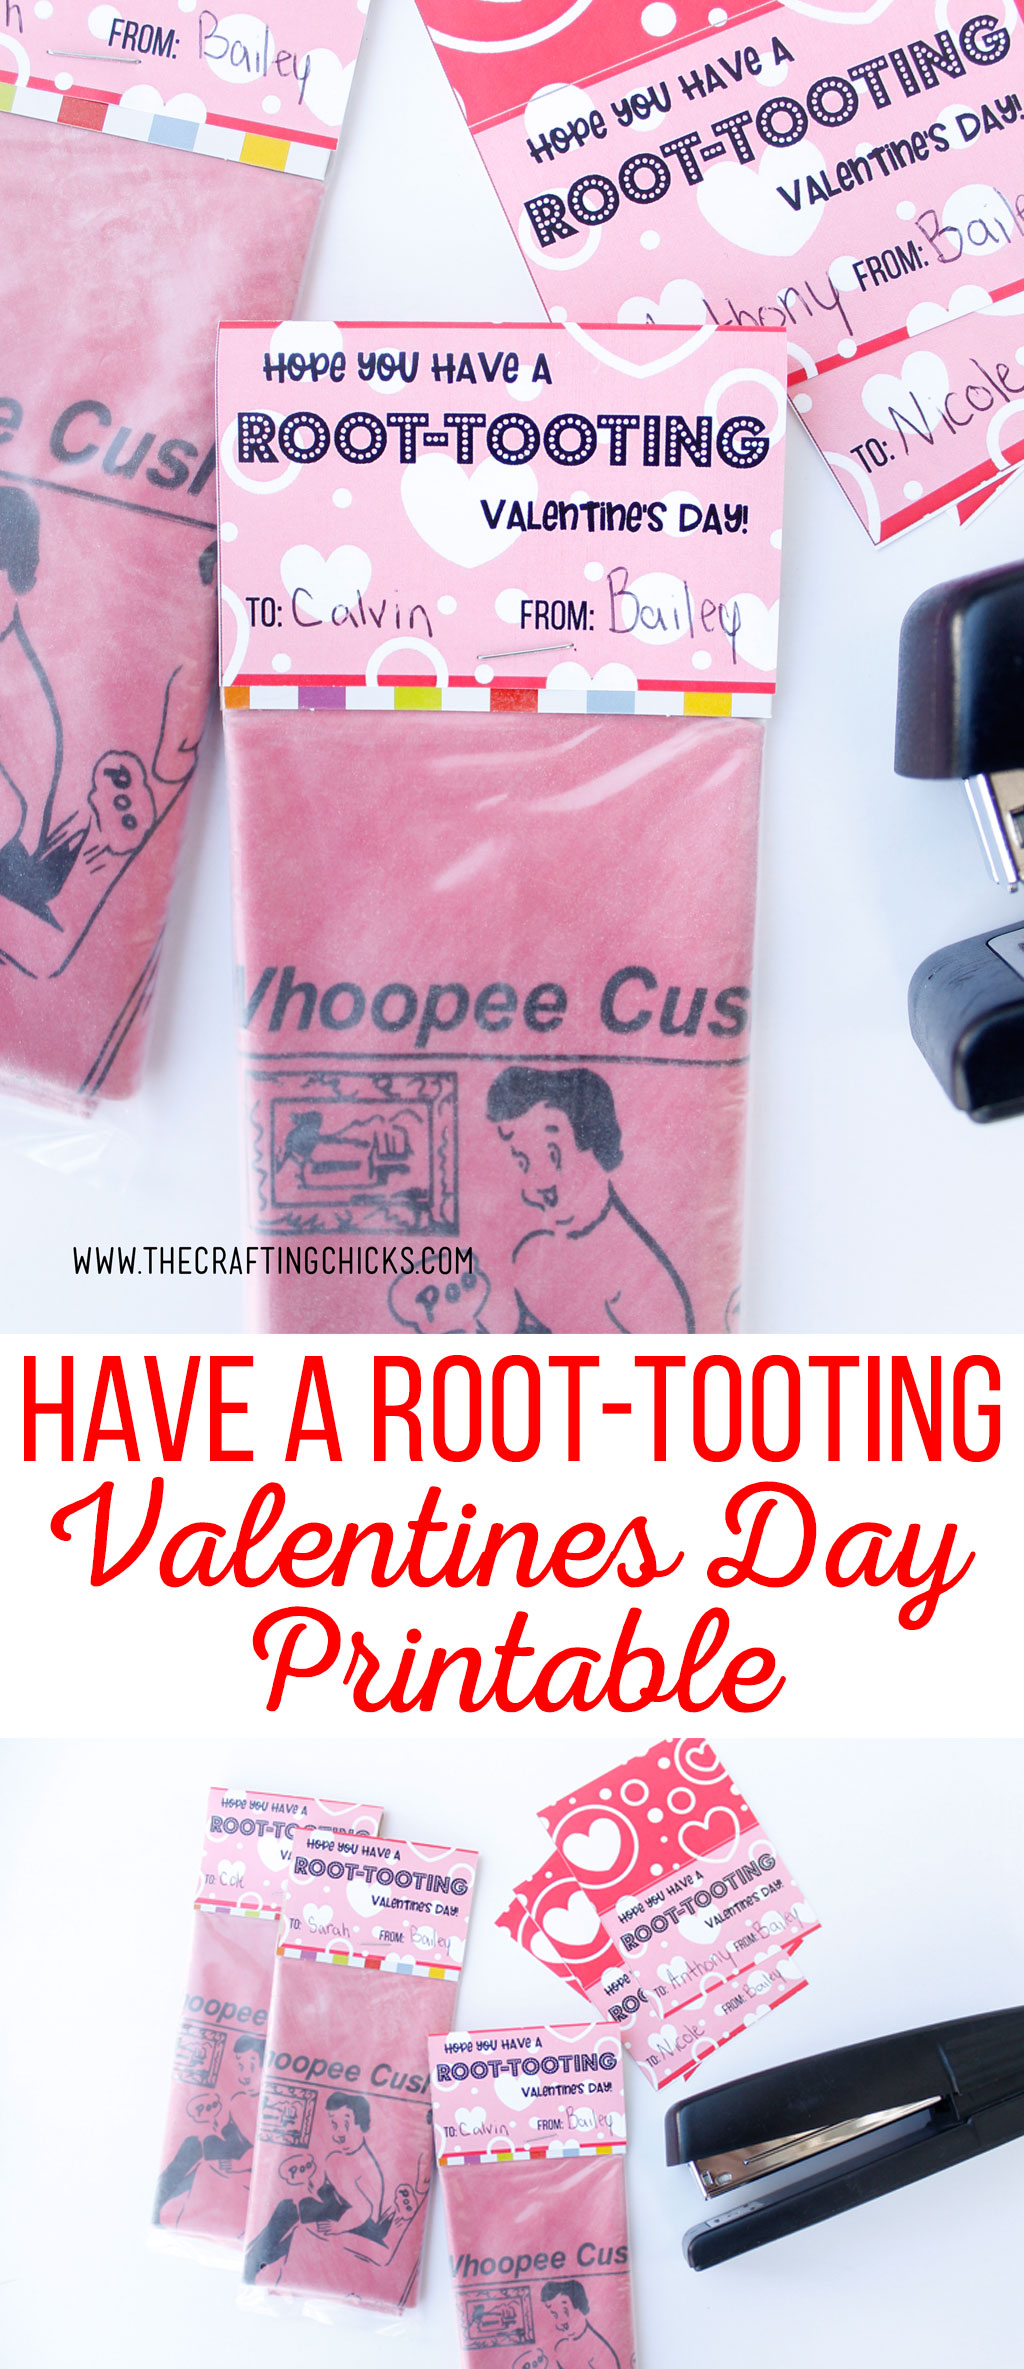 Have A Root-Tooting Valentines Day Printable | Let your kids give a laugh this Valentine with this fun "Have A Root-Tooting Valentines Day Printable" attached to a whoopee cushion. Kids will think it's hilarious. It will be the hit of the class valentines!